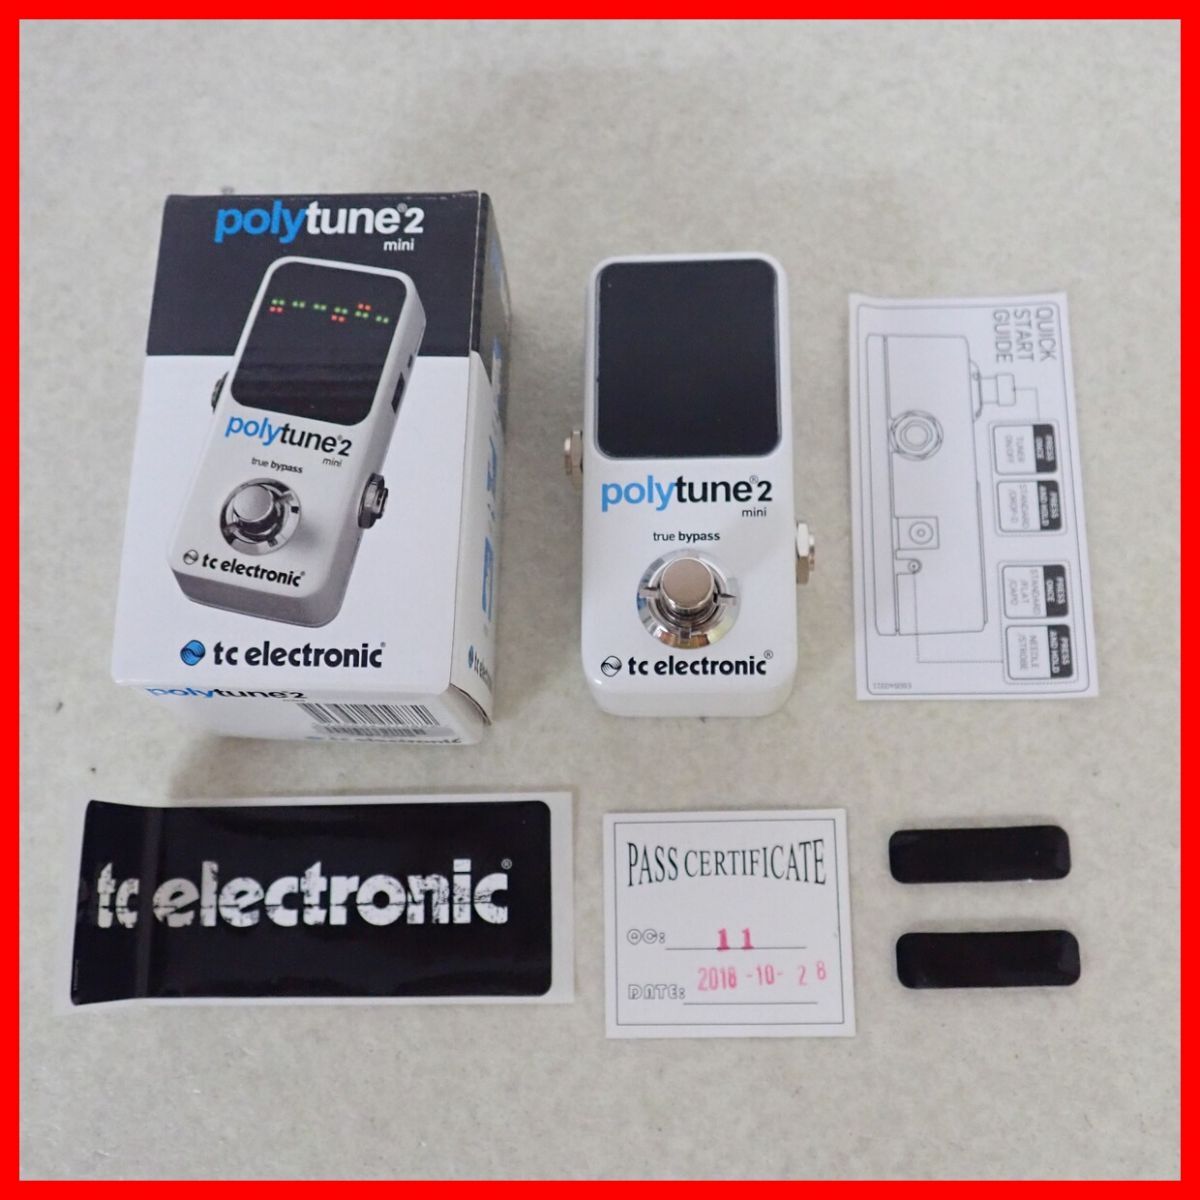 !TCELECTRONIC guitar effector polytune2 mini pedal tuner tea si- electronic box opinion attaching [PP